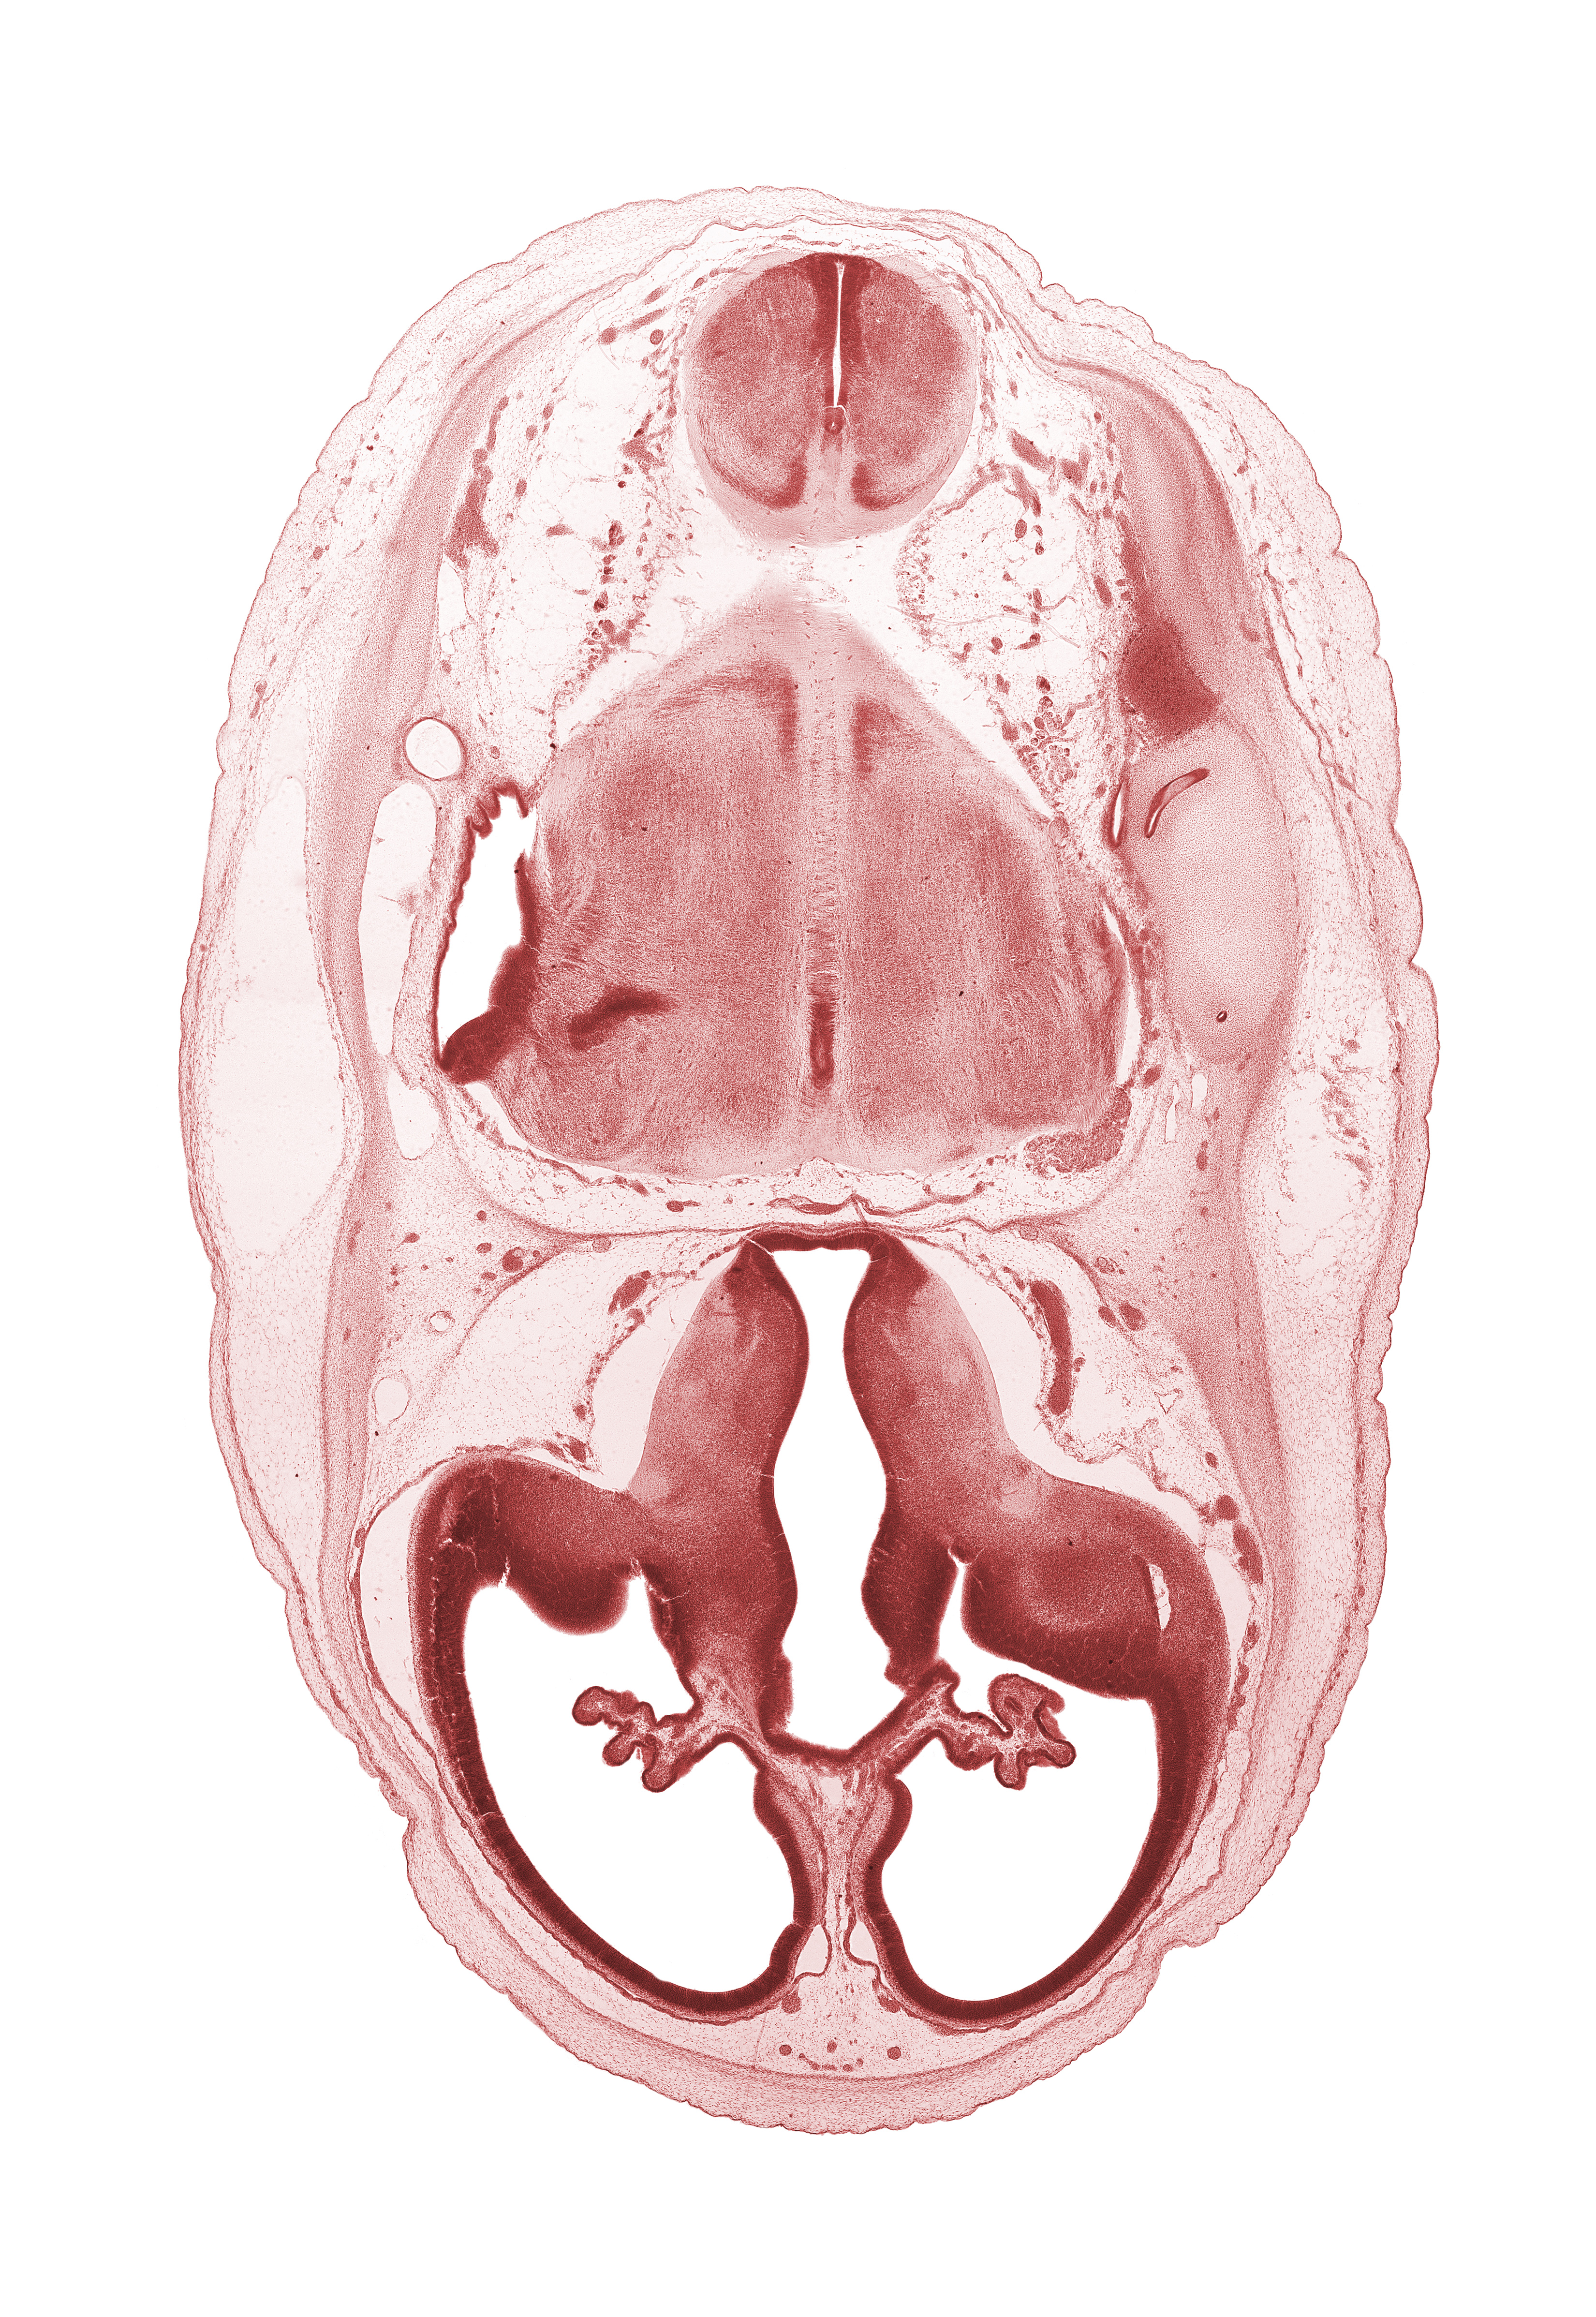 artifact separation(s), central canal, choroid fissure, choroid plexus, dural band for tentorium cerebelli, endolymphatic sac, falx cerebri region, hypothalamus, junction of internal carotid and posterior communicating arteries, lateral recess of rhombencoel (fourth ventricle), lateral ventricle, myelencephalon (medulla oblongata), pyramidal tract region, region of cervical flexure, spinal tract of trigeminal nerve (CN V), sulcus terminalis, third ventricle